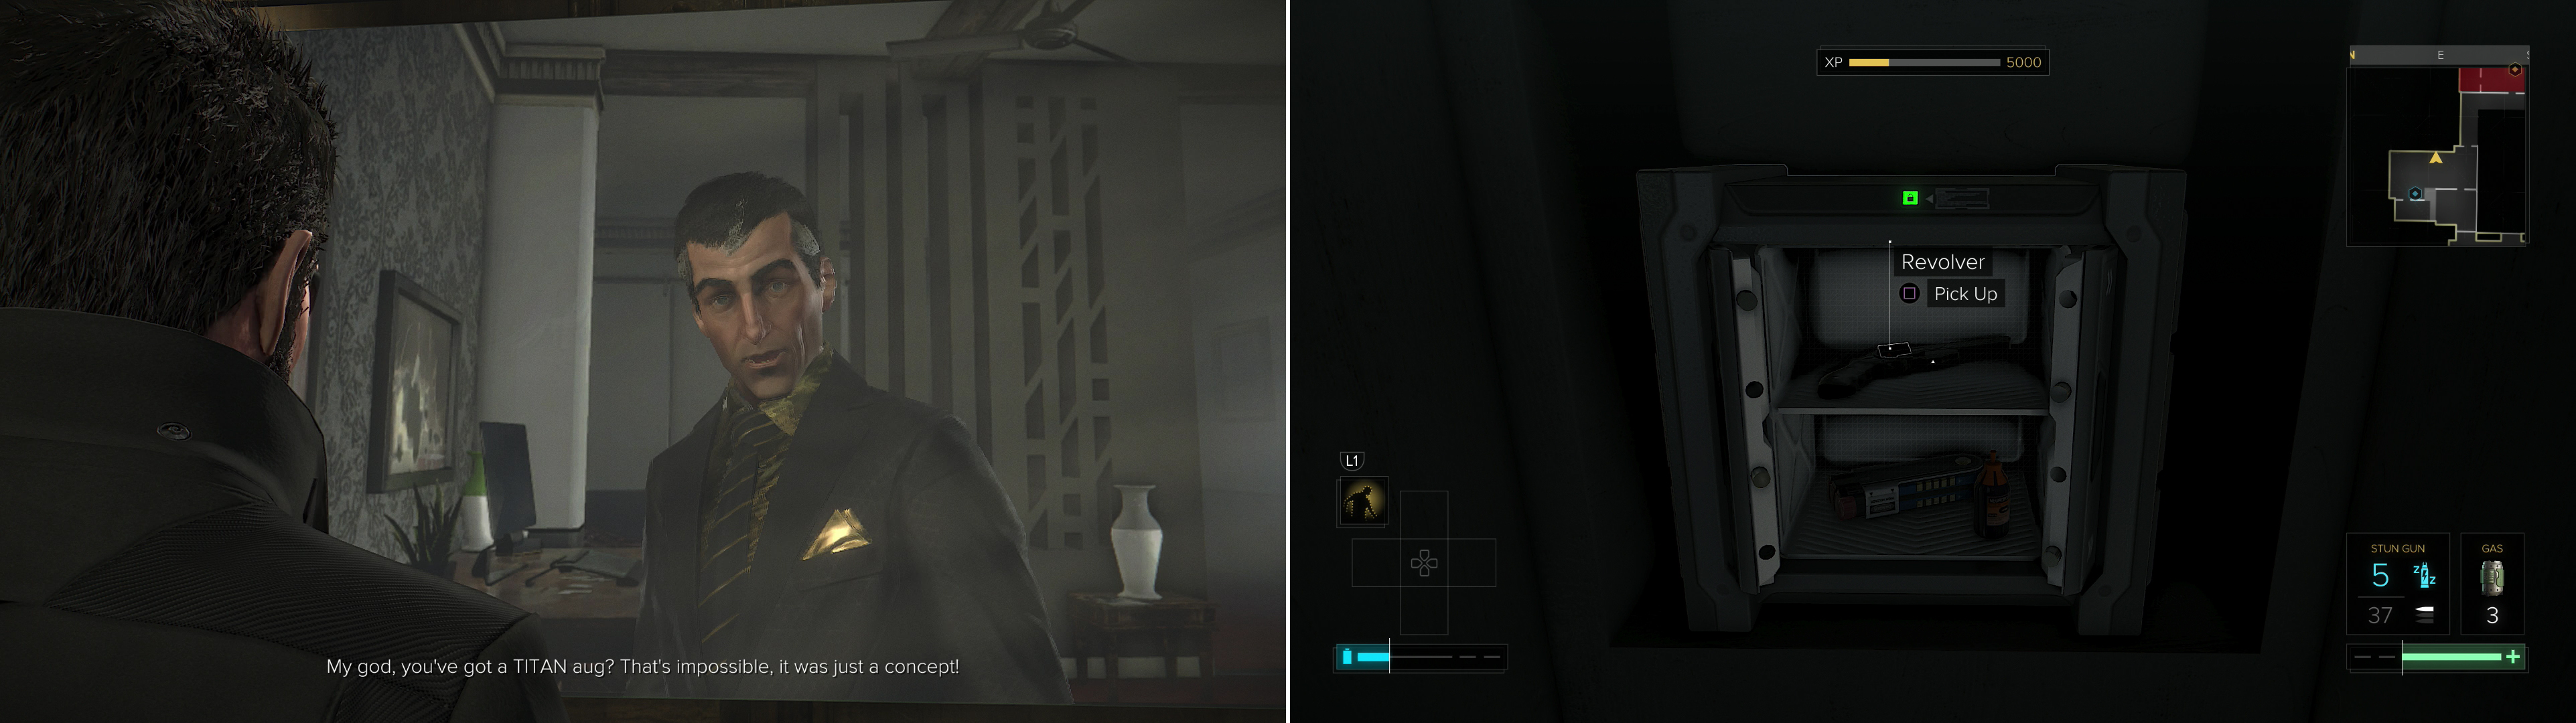 Confront Sarif and ask him about your mysterious augmentations (left) then go grab a bit of loot you couldn’t grab the first time around (right).